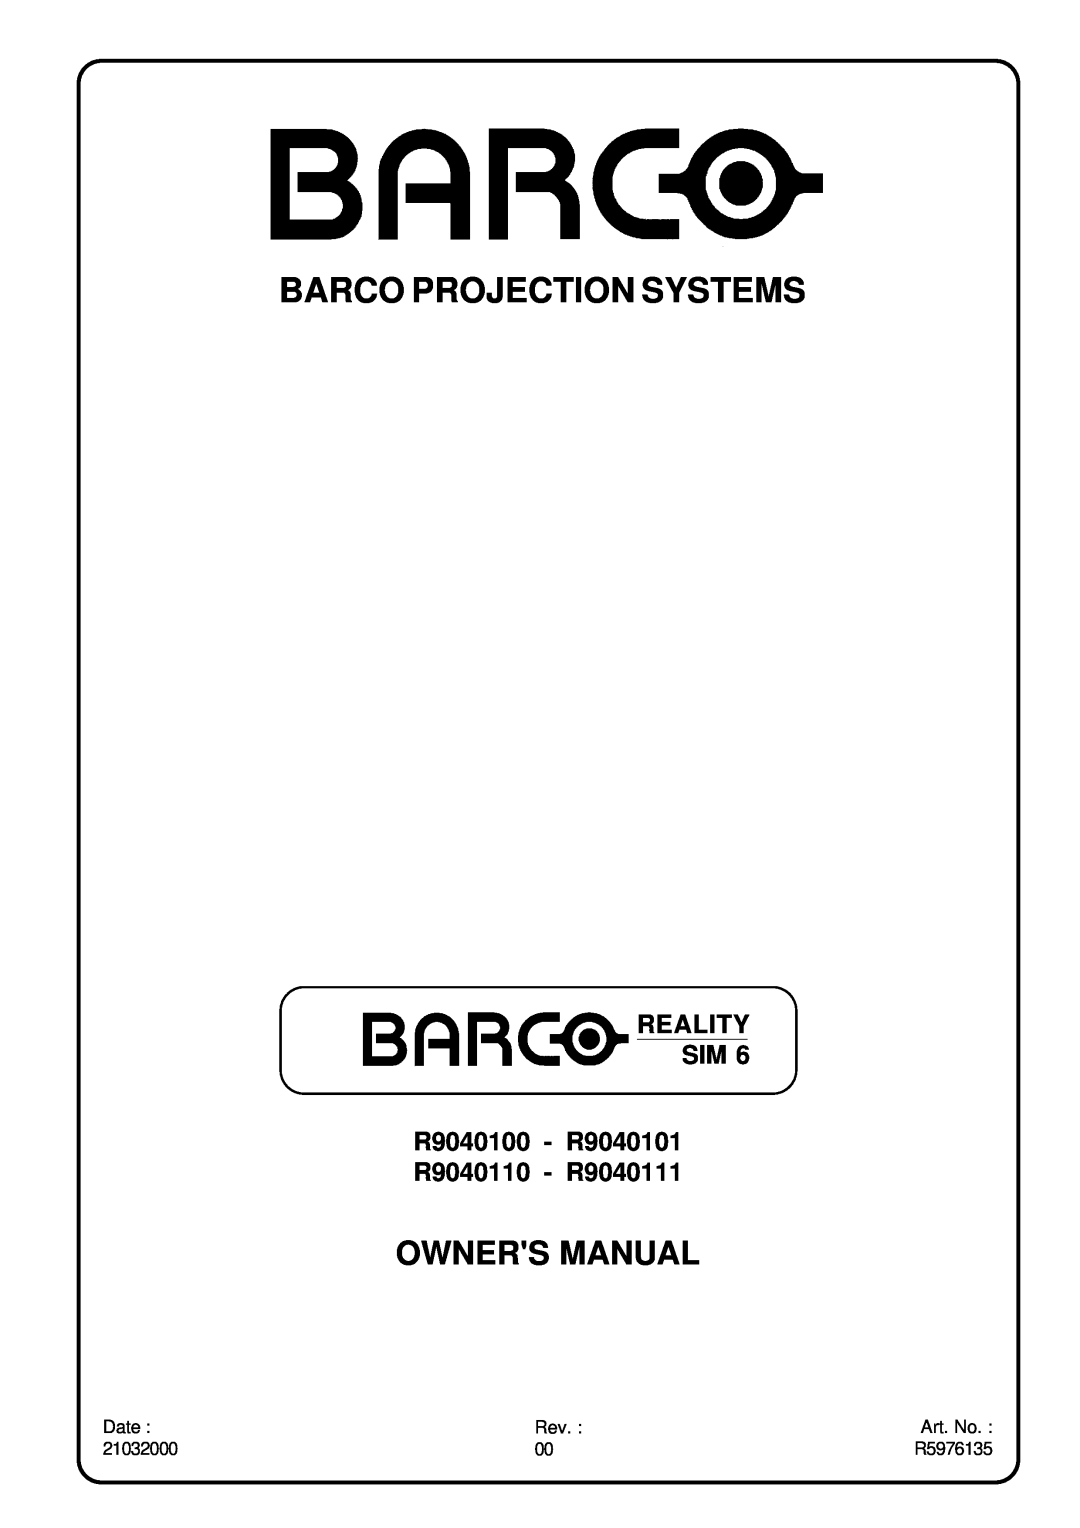 Barco owner manual Owners Manual, Barco Projection Systems, REALITY SIM R9040100 - R9040101 R9040110 - R9040111 